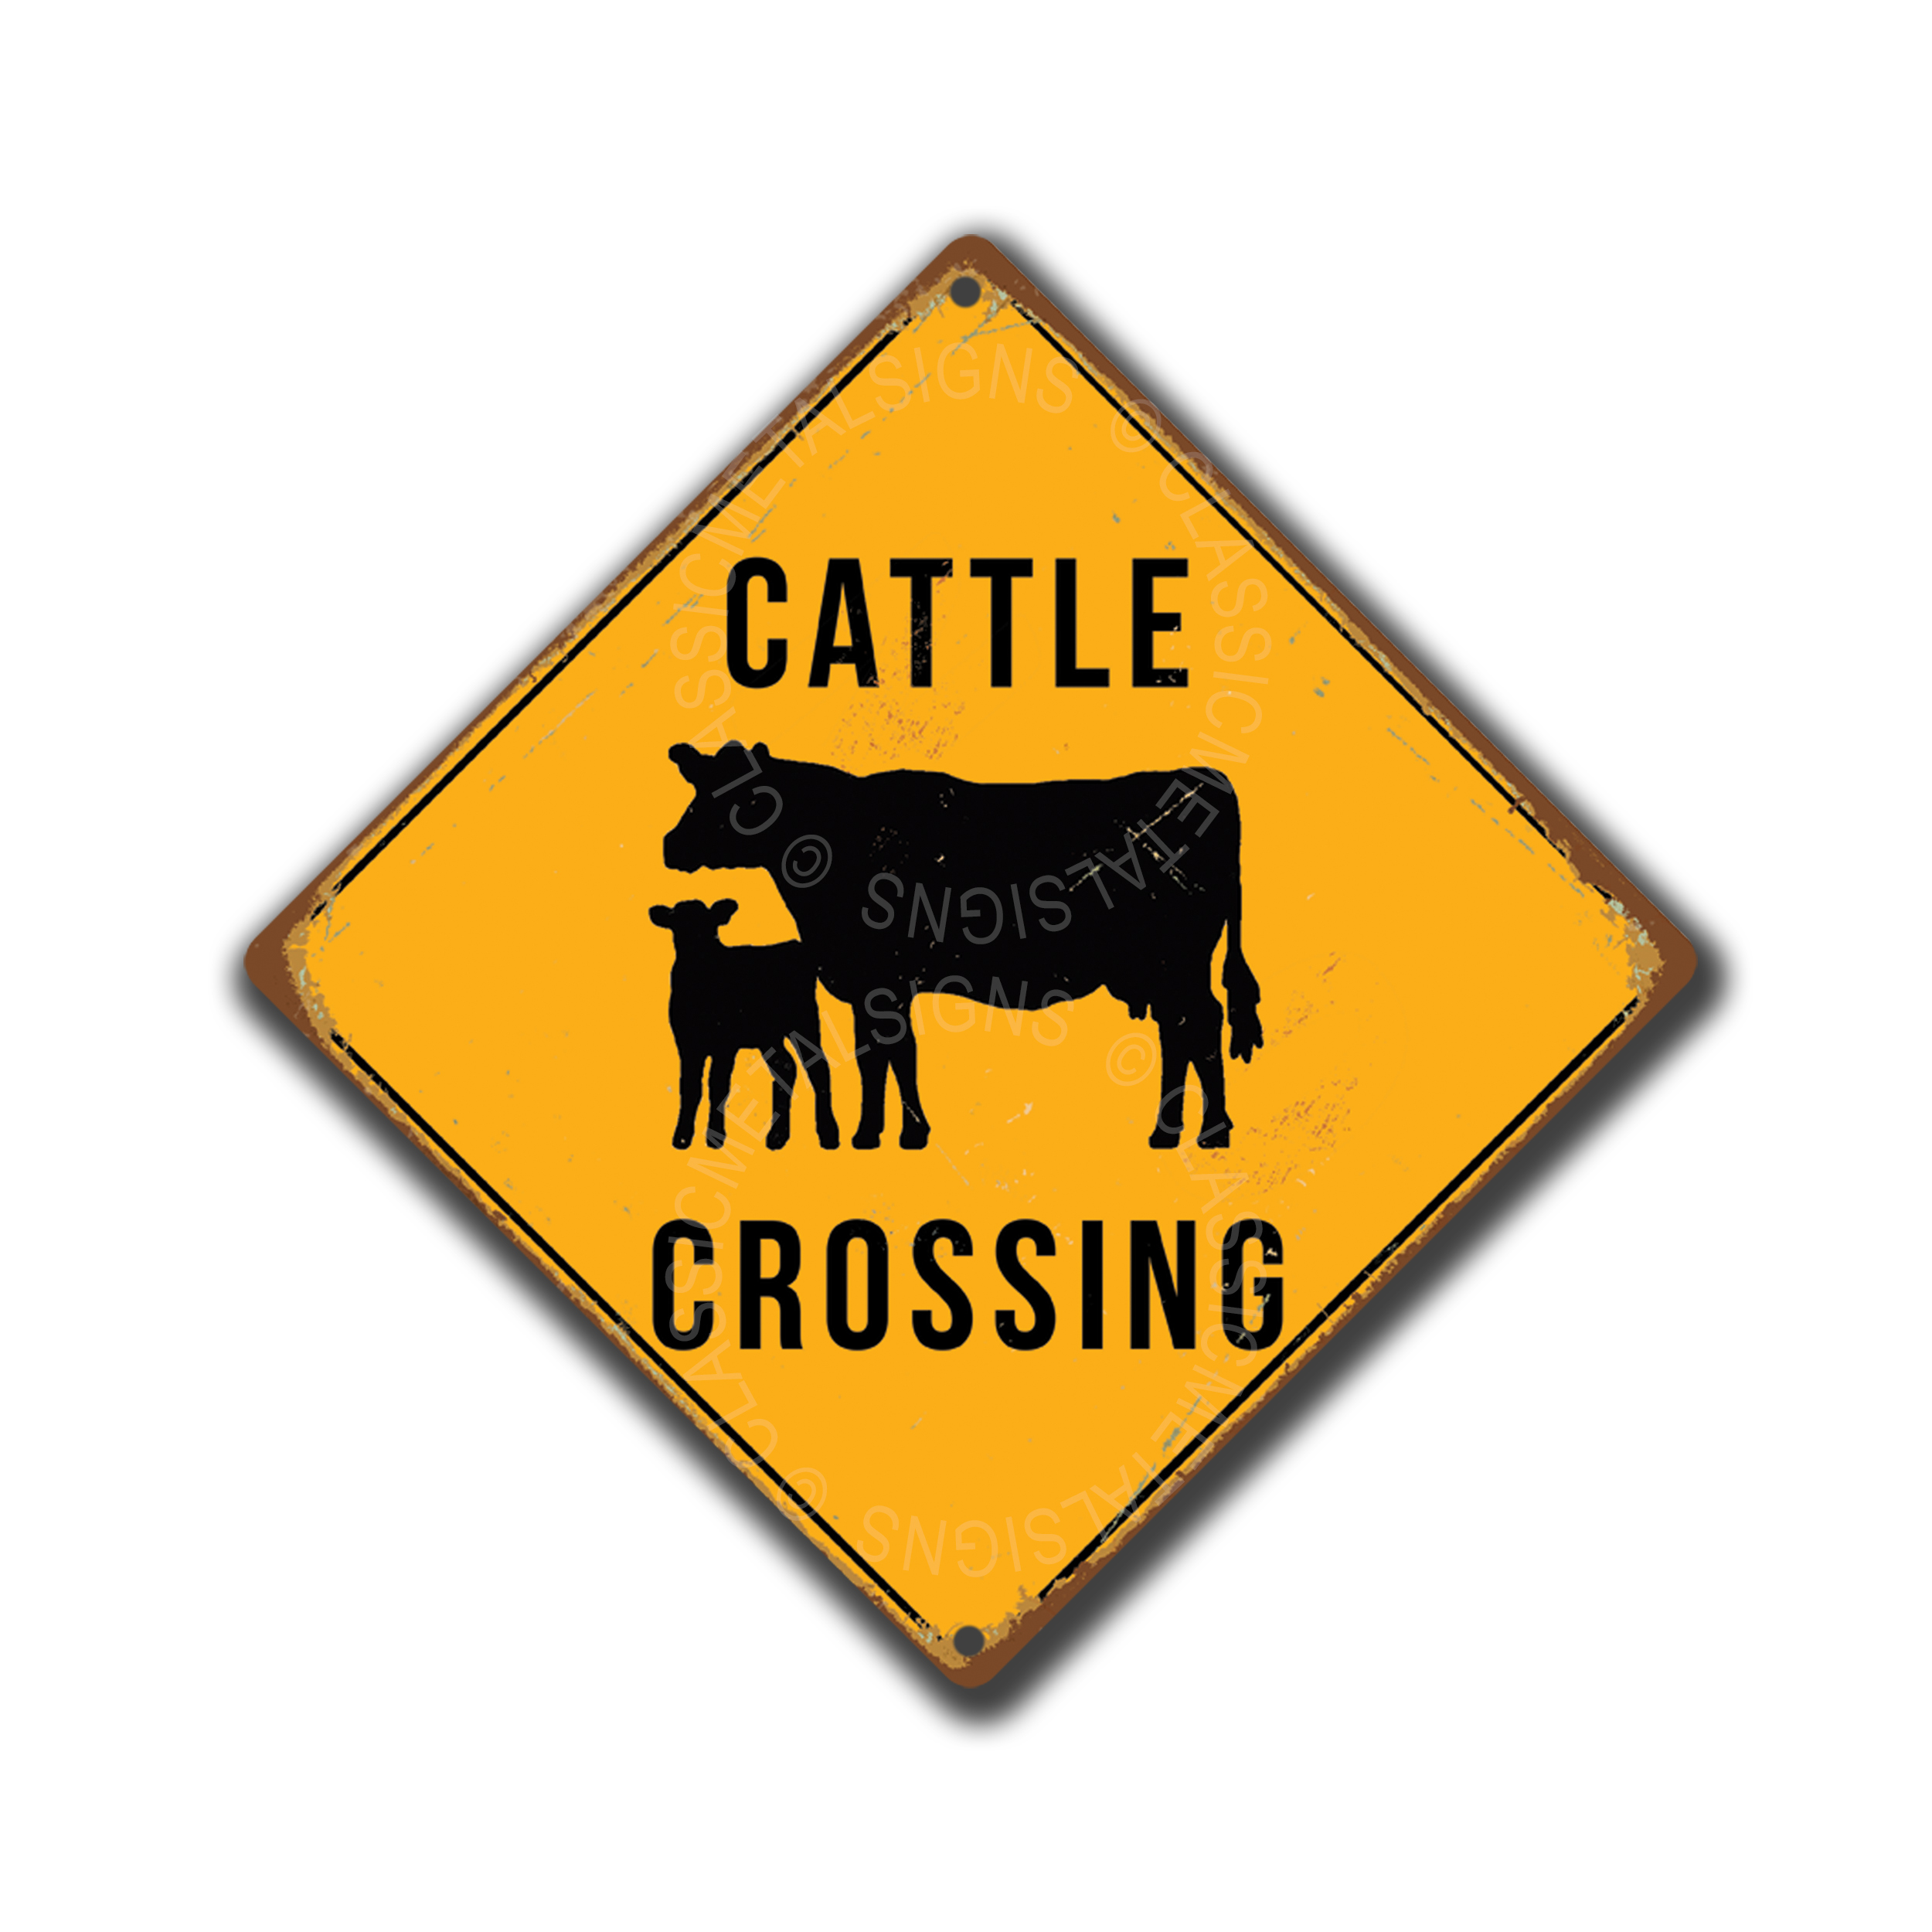 Cattle Crossing Sign